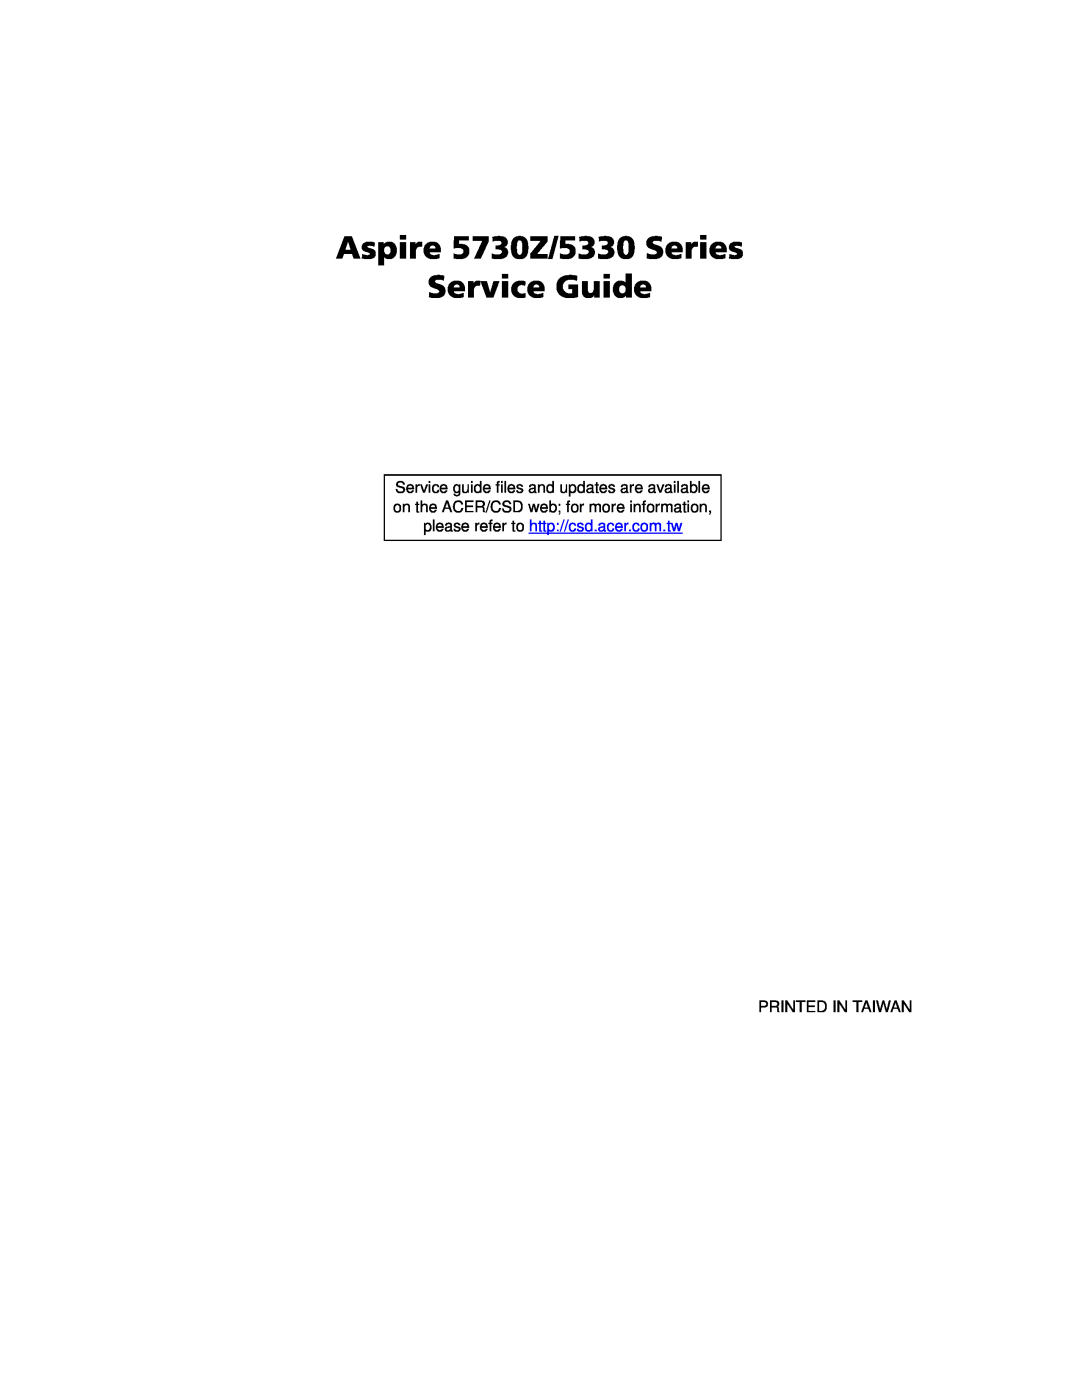 Acer manual Aspire 5730Z/5330 Series Service Guide, please refer to http//csd.acer.com.tw 